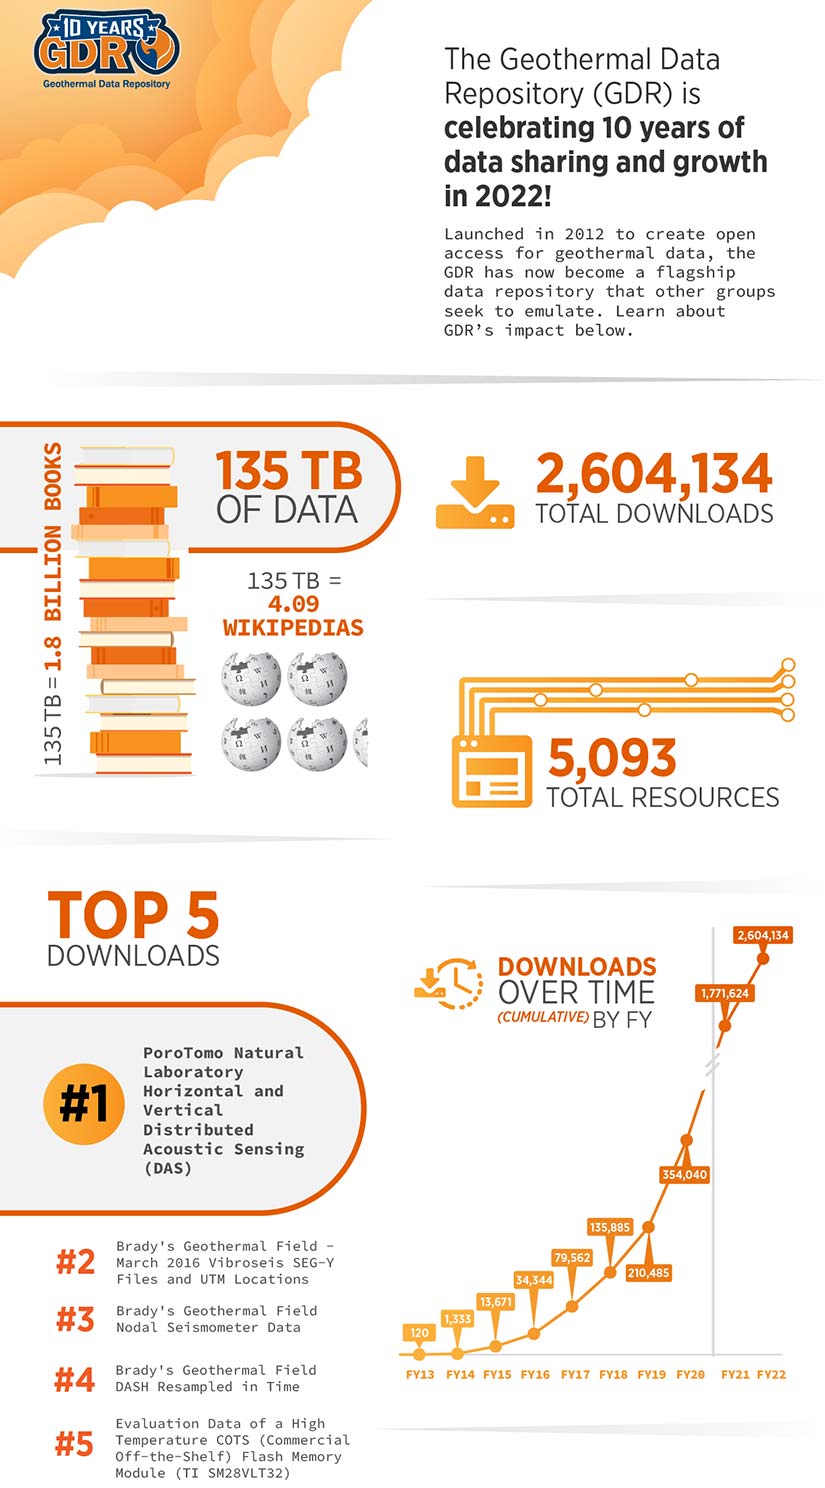 Infographic with text reading the Geothermal Data Repository is celebrating 10 years of data sharing and growth in 2022. Launching in 2012 to create open access for geothermal data, the GDR has now become a flagship data repository that other groups seek to emulate. The GDR boasts 135 TB of data, equal to 4.09 Wikipedias or 1.8 billion books. 2,604,134 total downloads. 5,093 total resources. Top 5 downloads to date are: 1. PoroTomo Natural Laboratory Horizontal and Vertical Distributed Acoustic Sensing Data. 2. Brady's Geothermal Field - March 2016 Vibroseis SEG-Y Files and UTM Locations. 3. Brady's Geothermal Field Nodal Seismometer Data 4. Brady's Geothermal Field DASH Resampled in Time 5. Evaluation Data of a High Temperature COTS Flash Memory Module for Use in Geothermal Electronics Packages